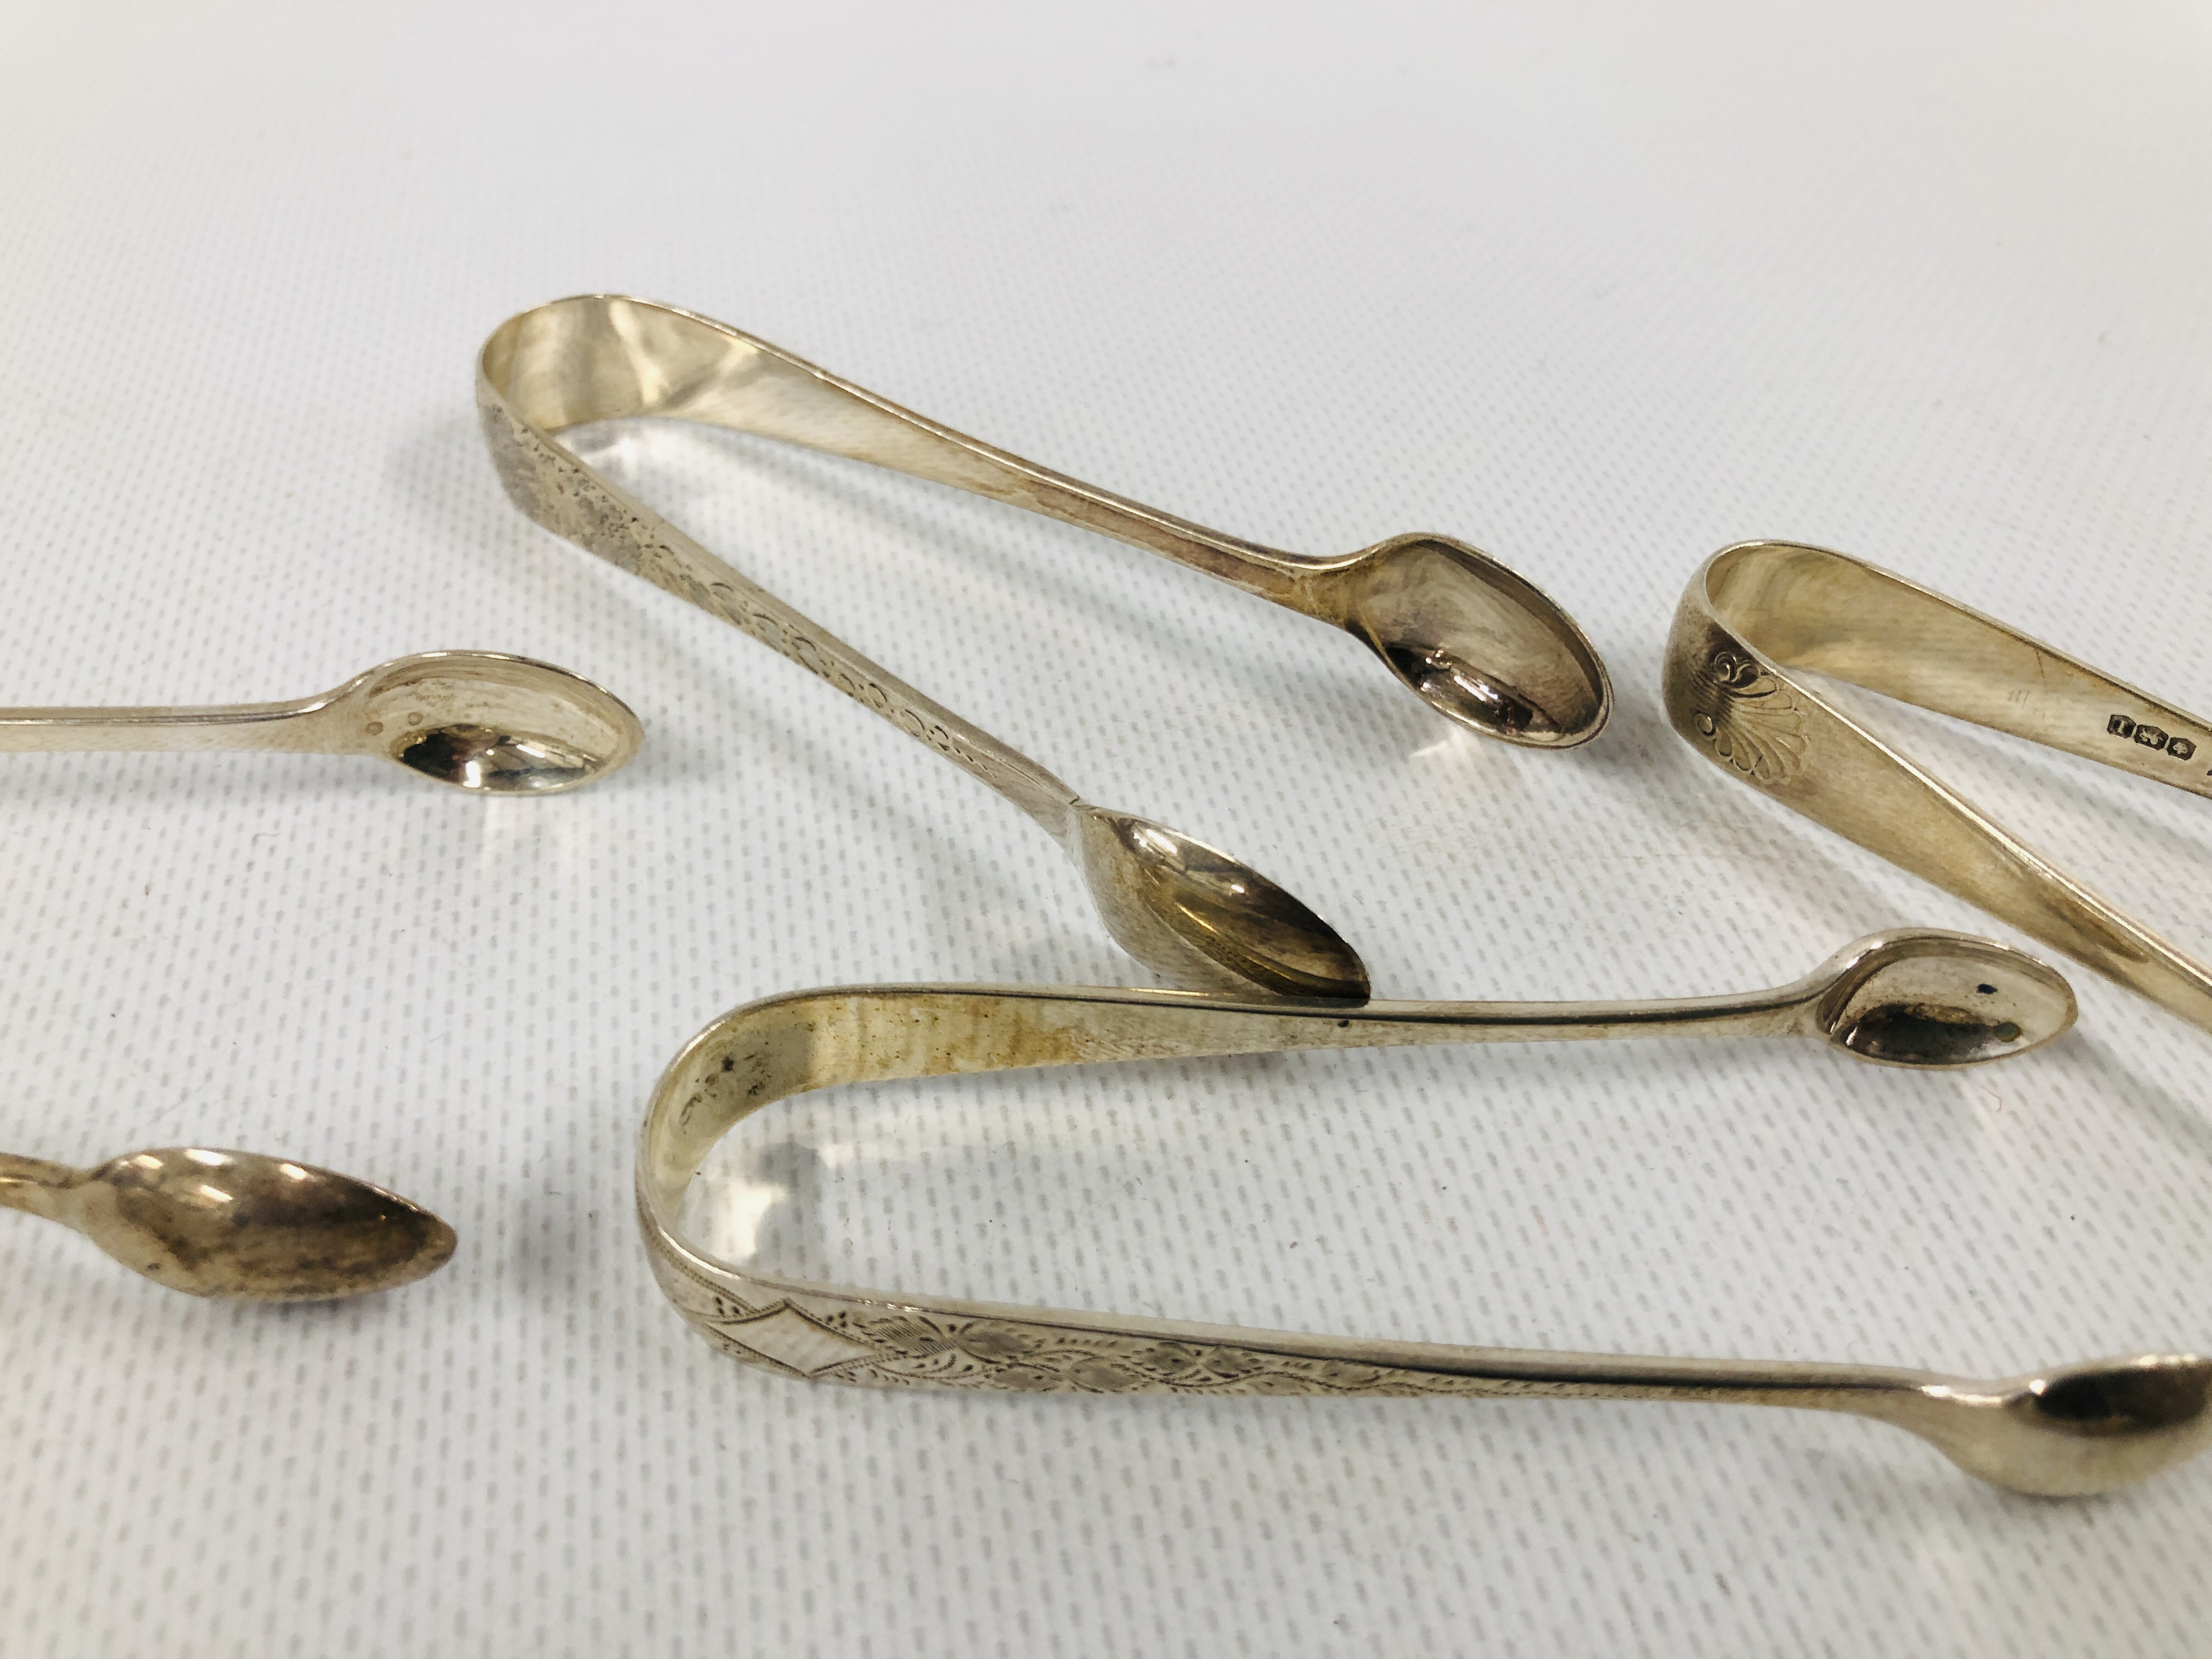 GROUP OF 8 VARIOUS SILVER SUGAR NIPS, VARIOUS MAKERS AND ASSAYS. - Image 5 of 7